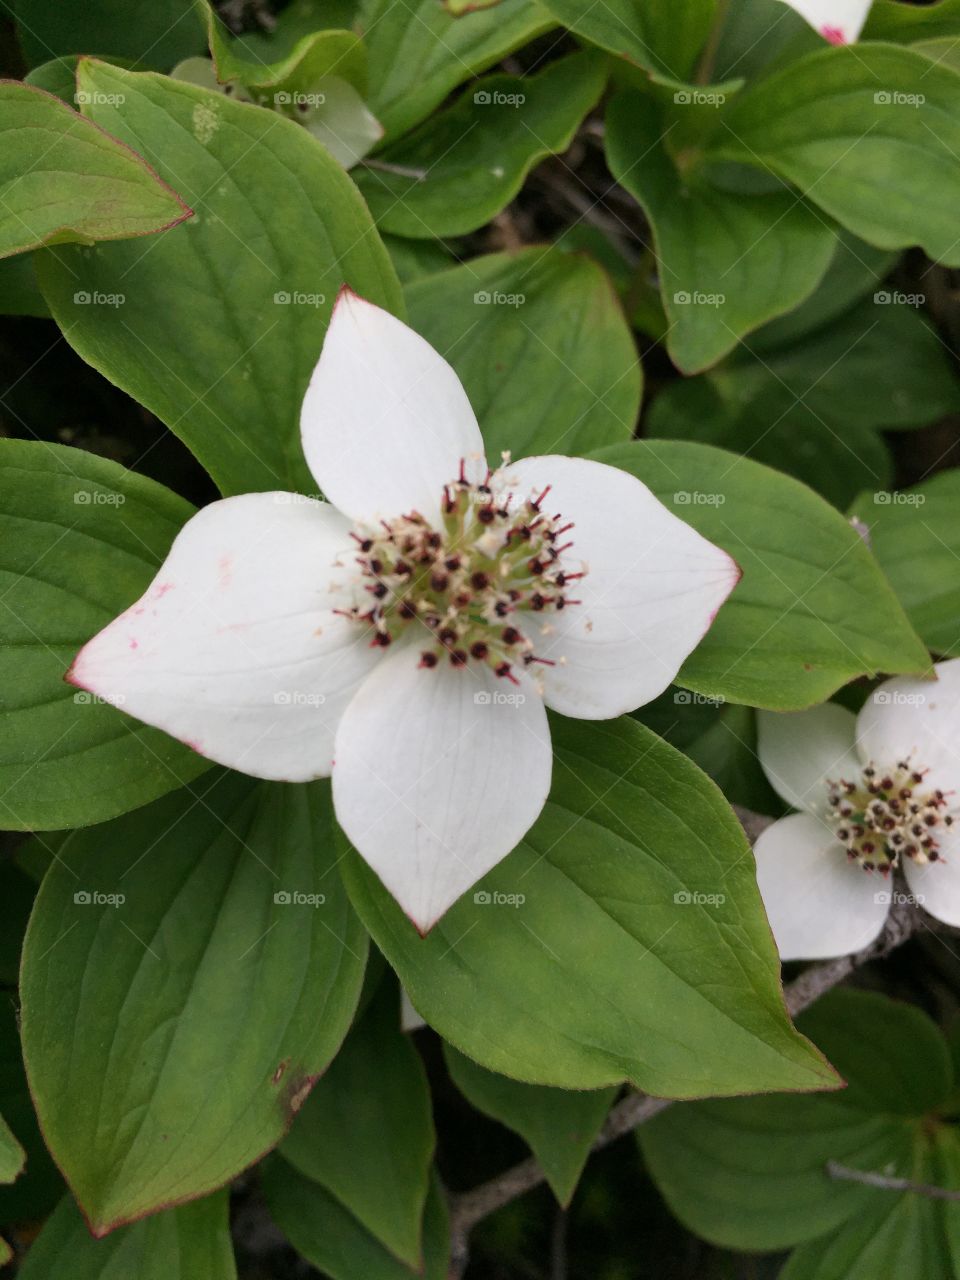 Blooming white flower with red tips on leaves 